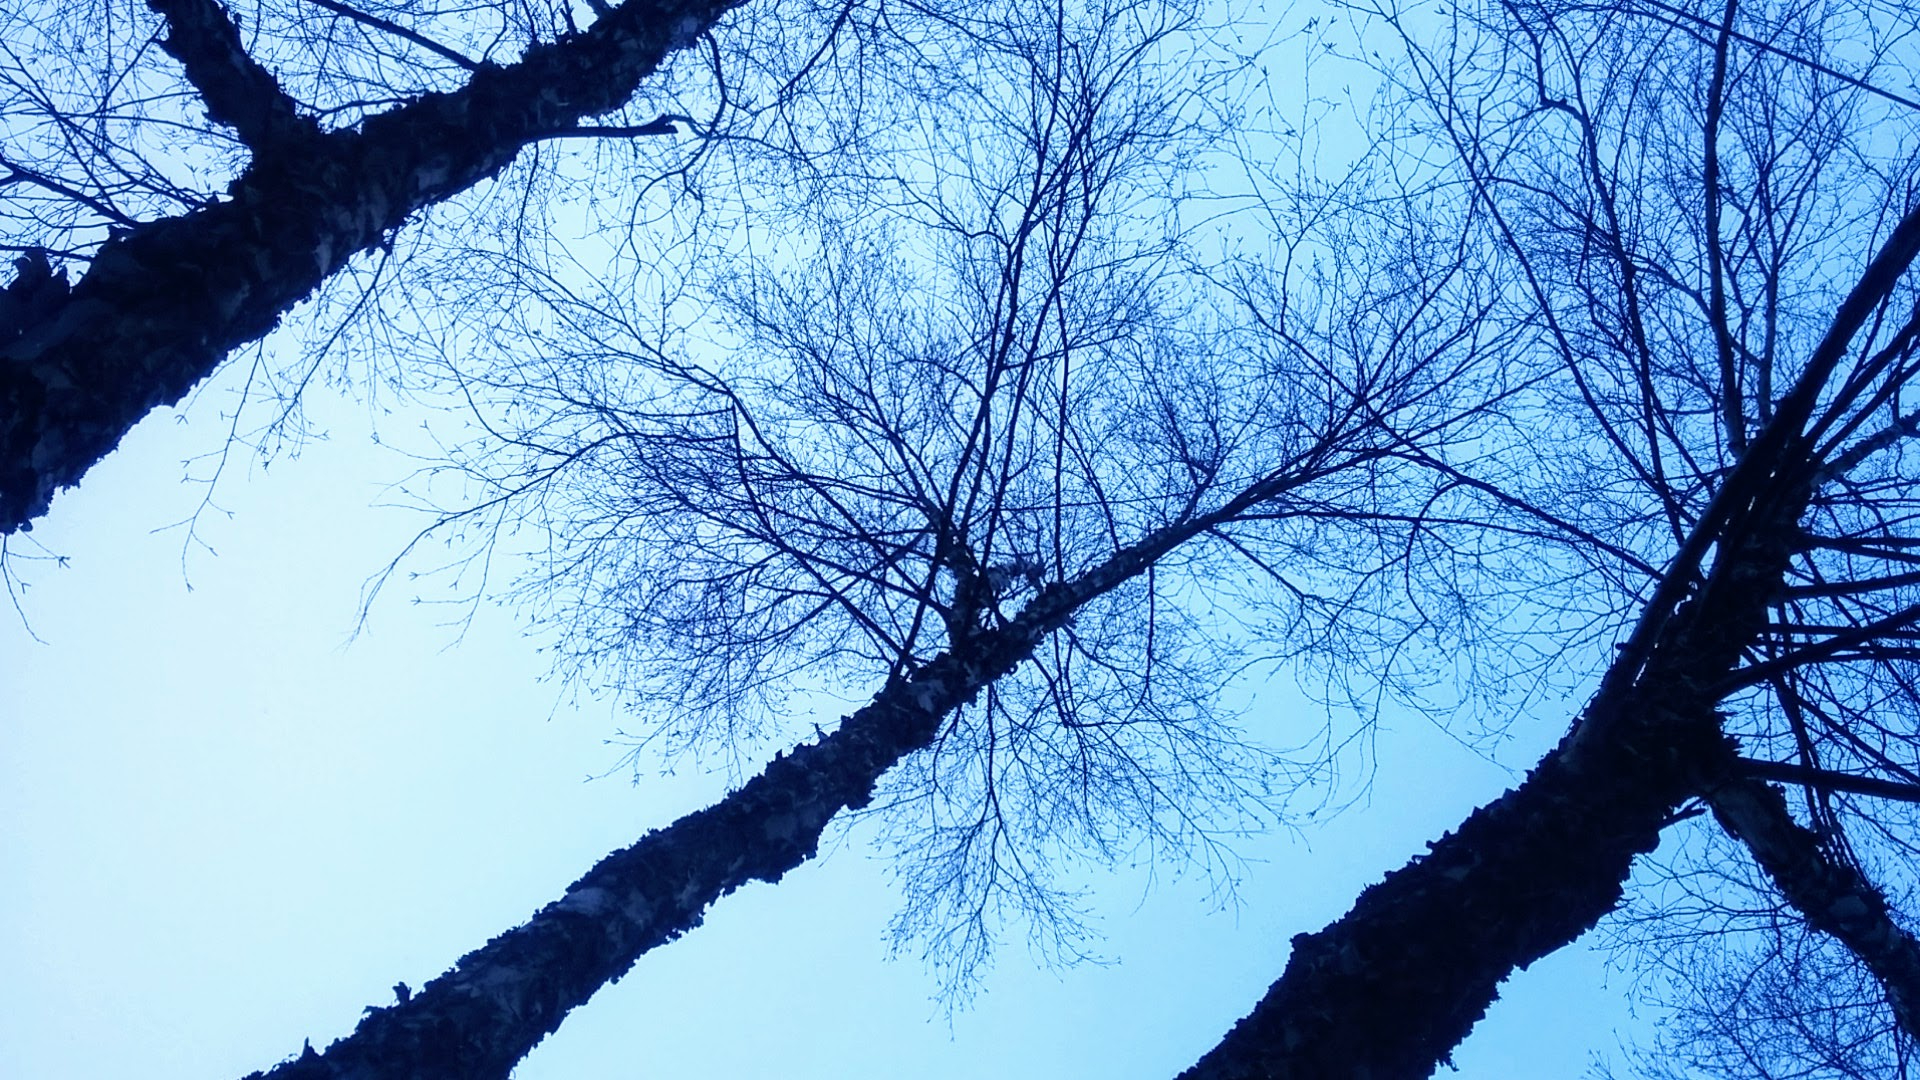 Looking up at the tops of three tall birch trees with peeling barks. Photo taken in Winter, so there are no leaves on the branches. The trees appear as silhouettes due to the low light of the evening. Branches extend from the barks near the treetops.